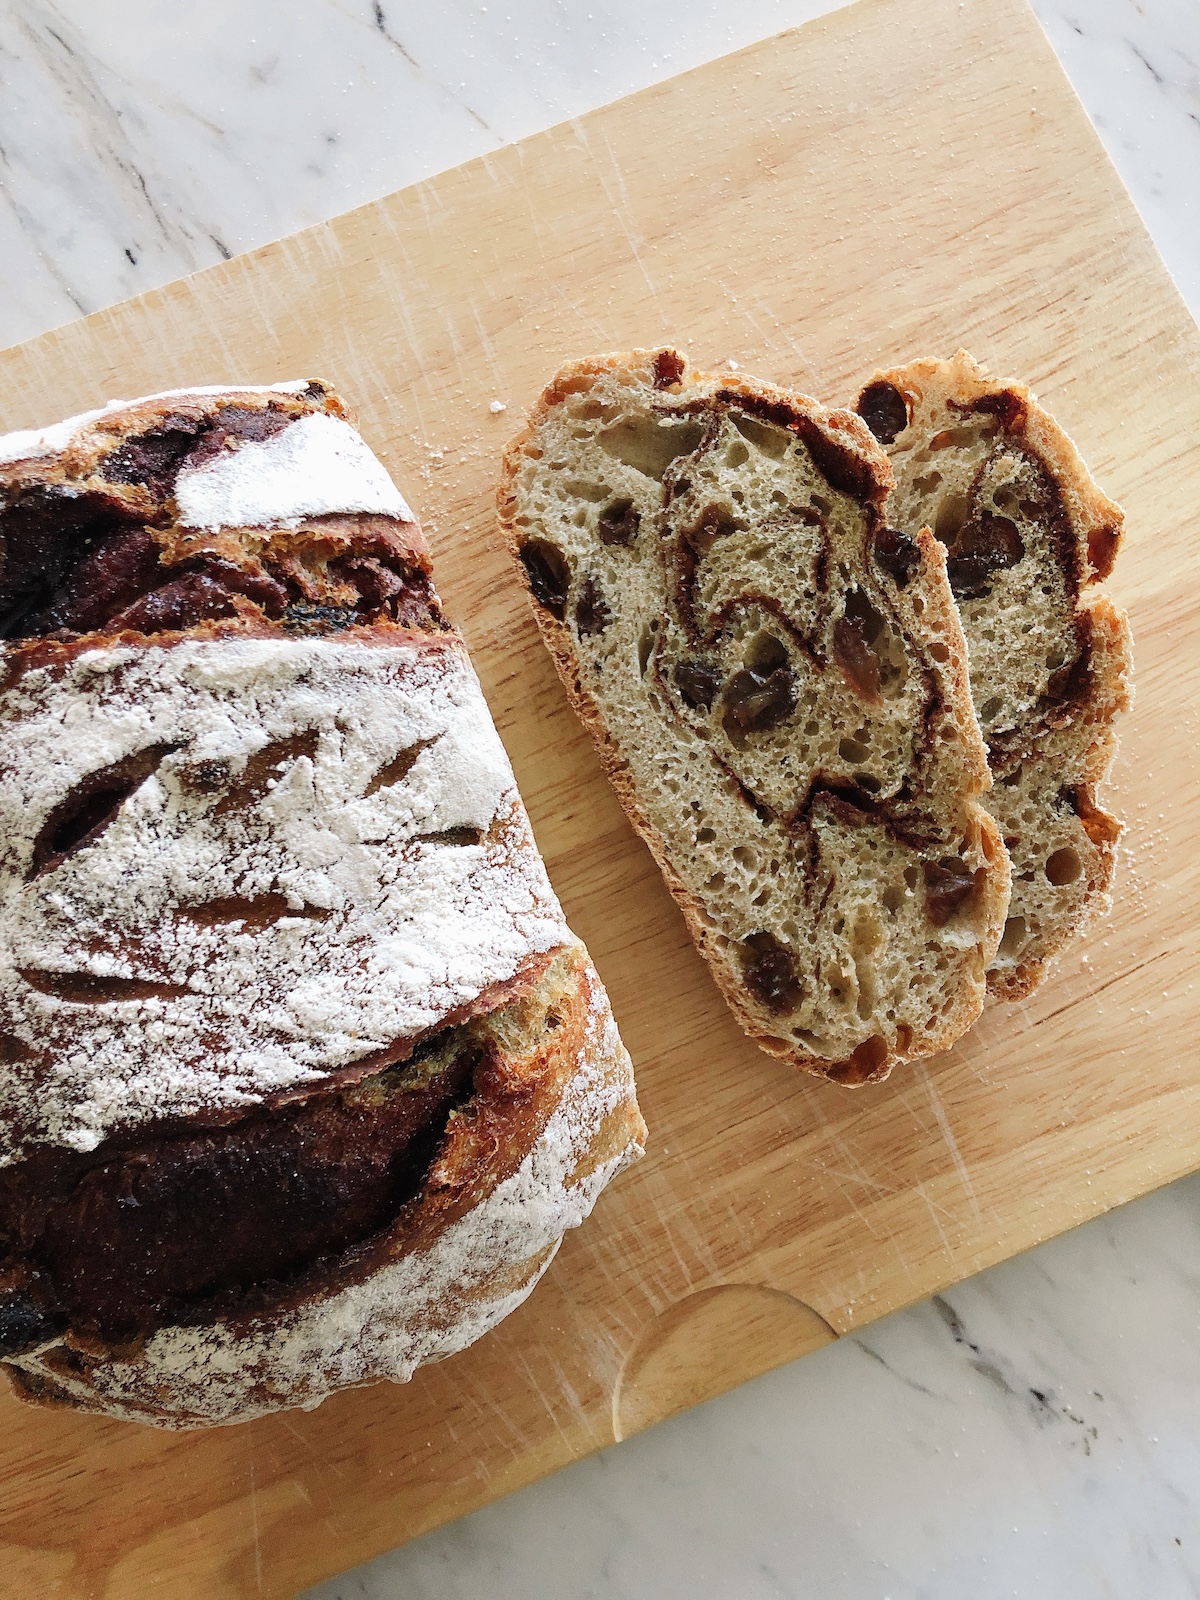 Two slices of cinnamon raisin no knead bread beside the entire loaf both on a wooden cutting board